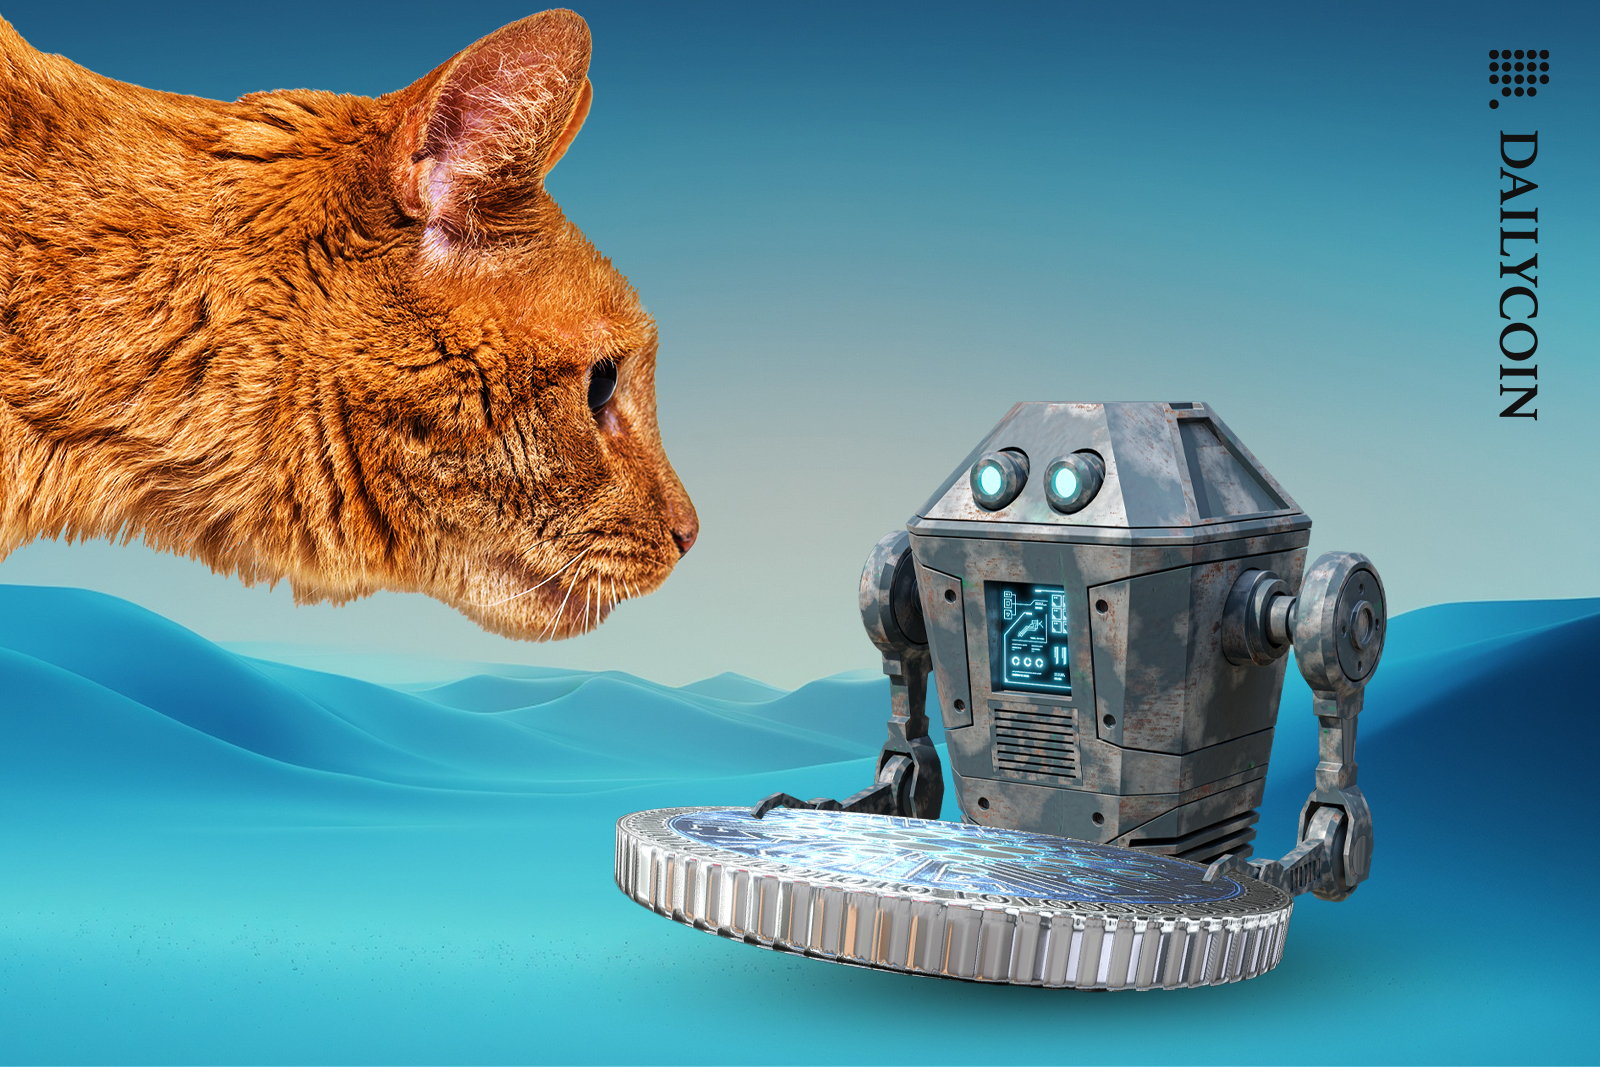 A cat looking at the robot developing Cardano.